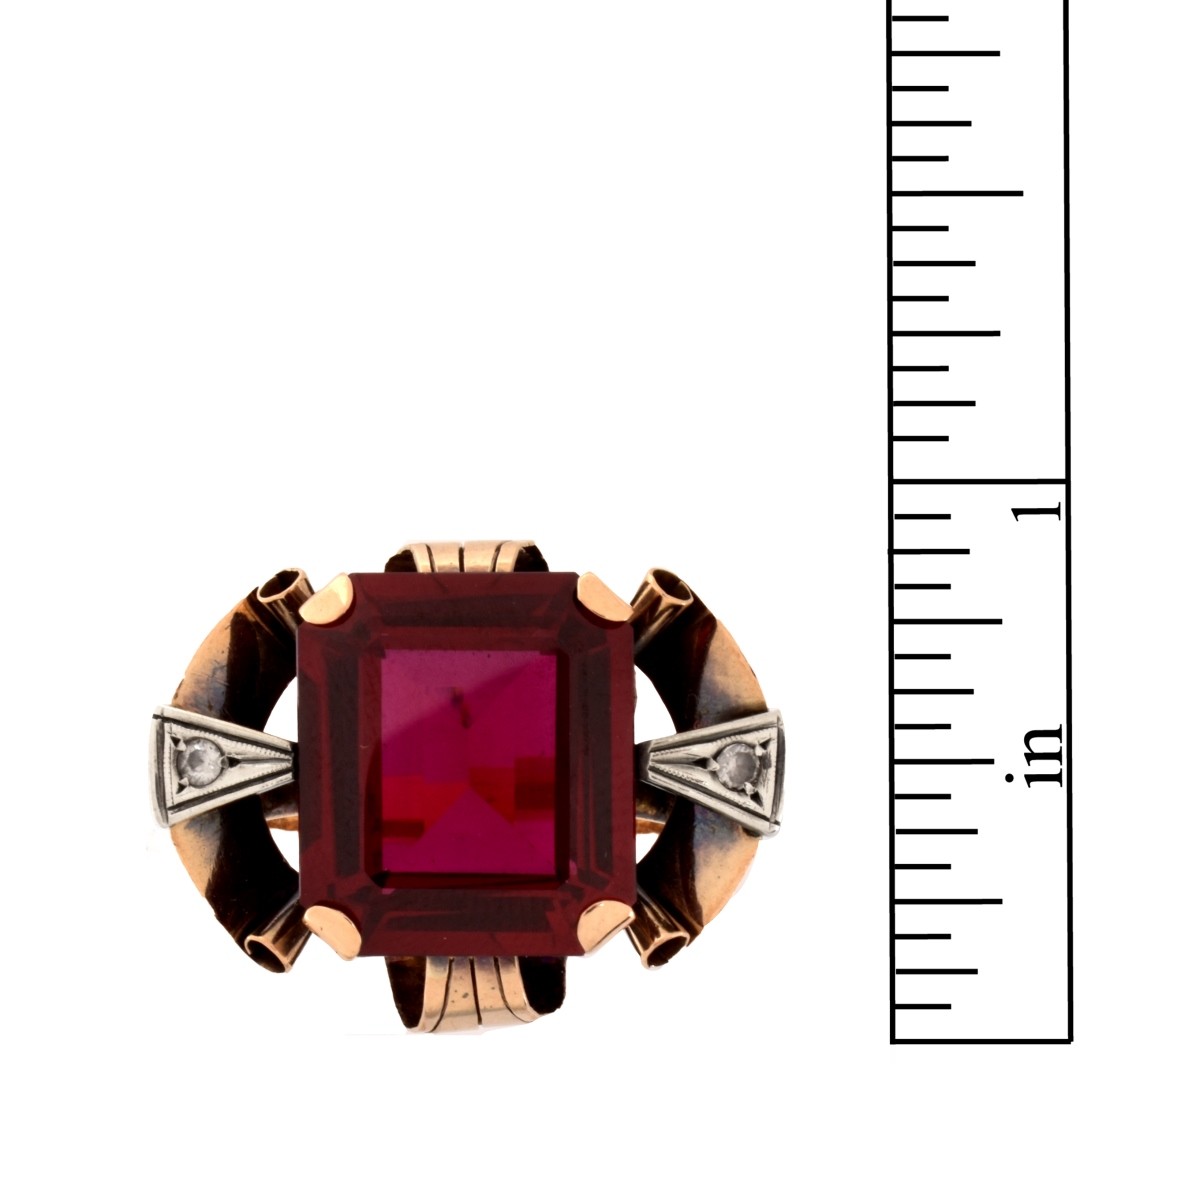 Retro 18K and Ruby Ring